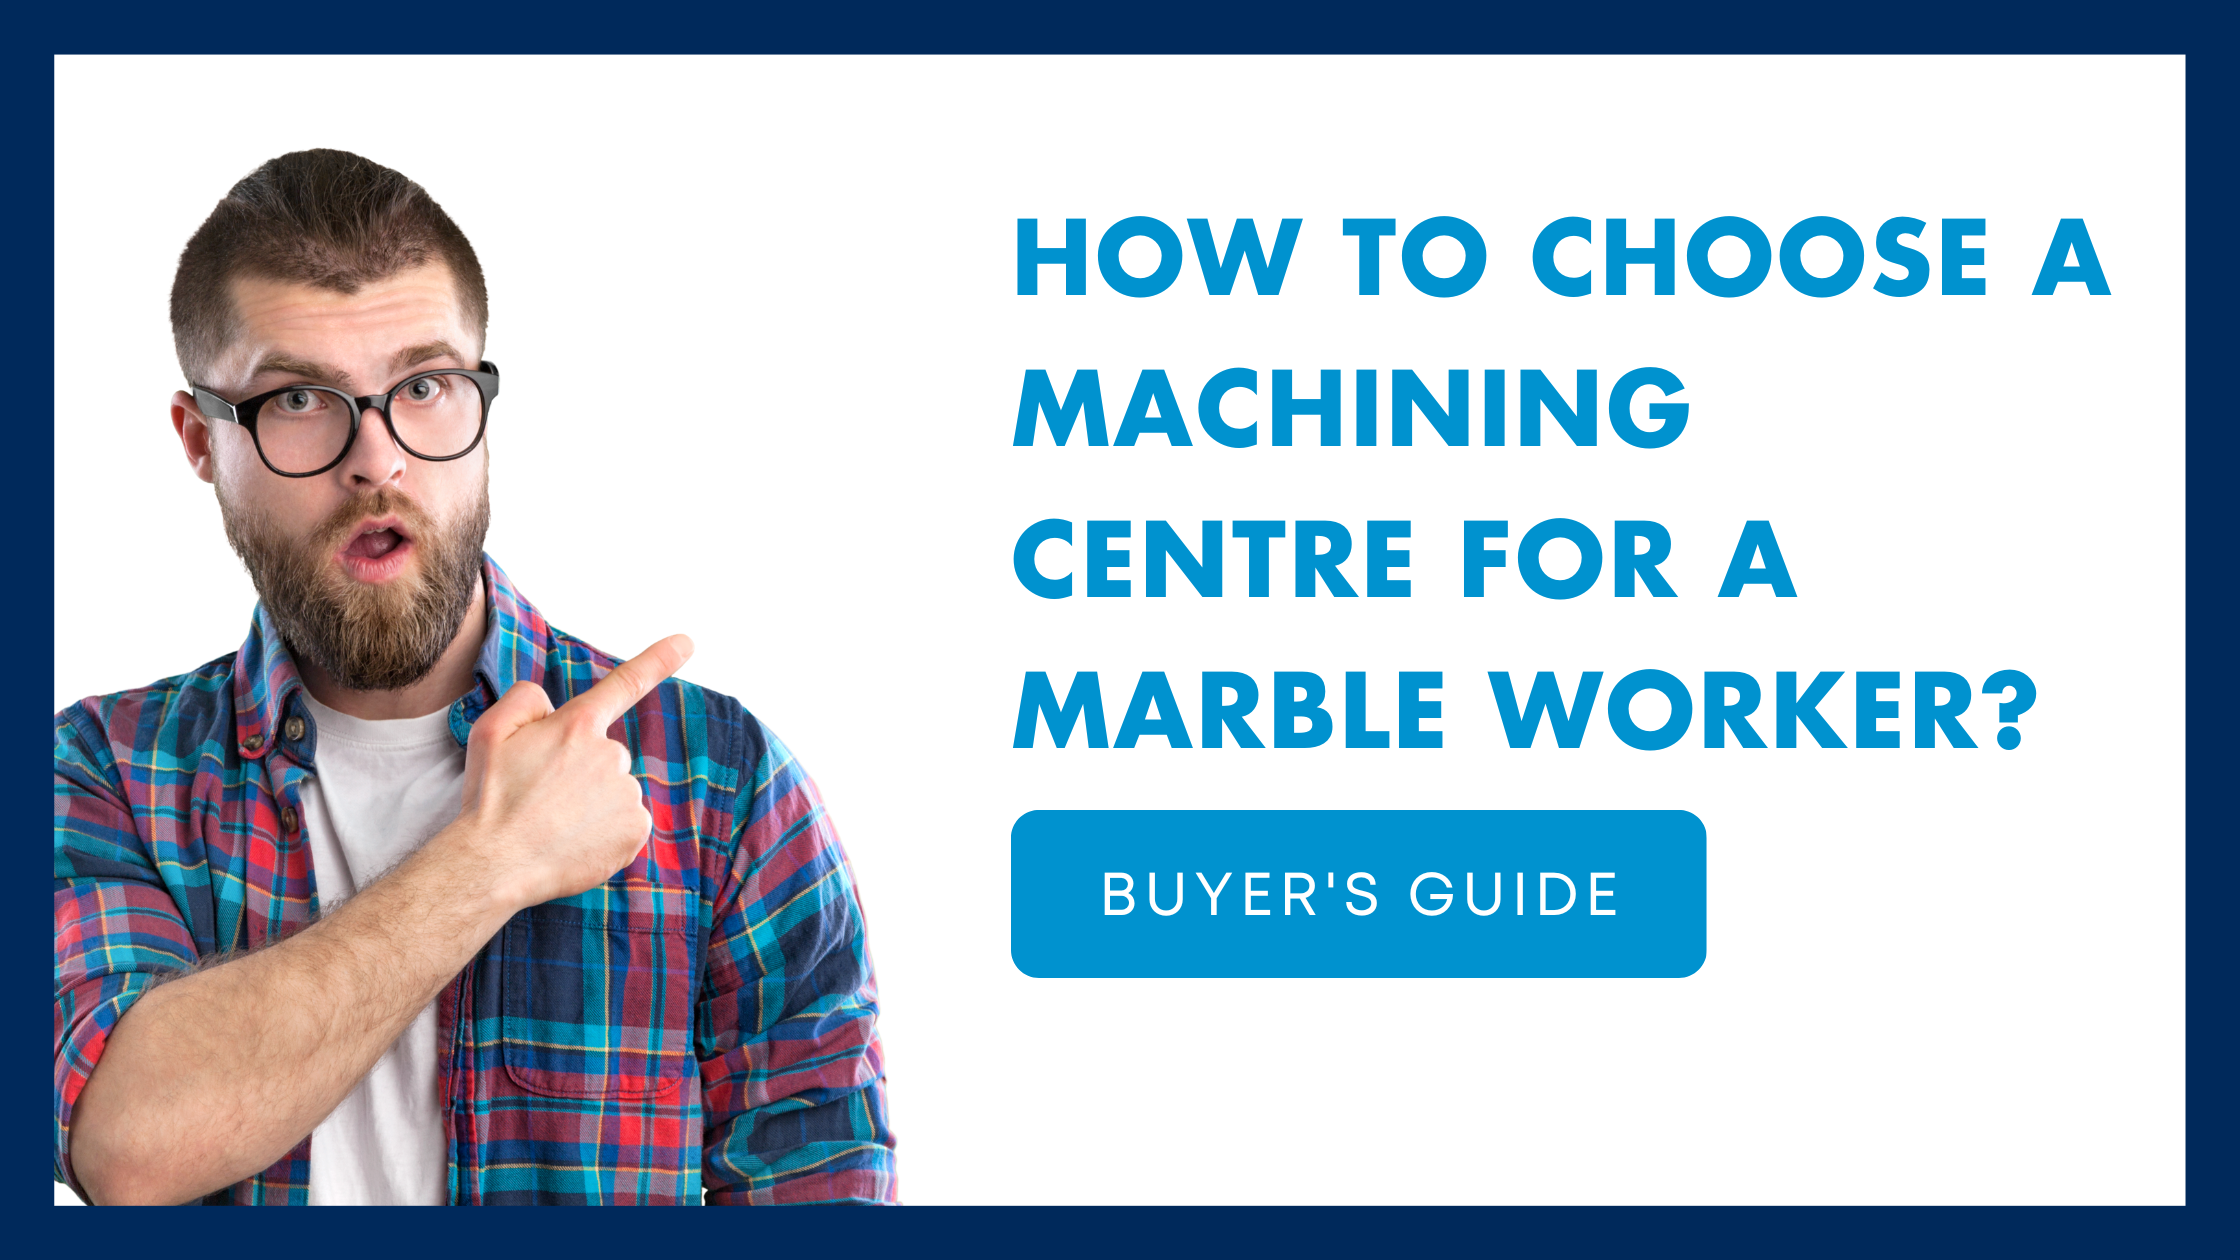 Guide for purchasing machine tools: How to choose a machining centre for a marble worker?